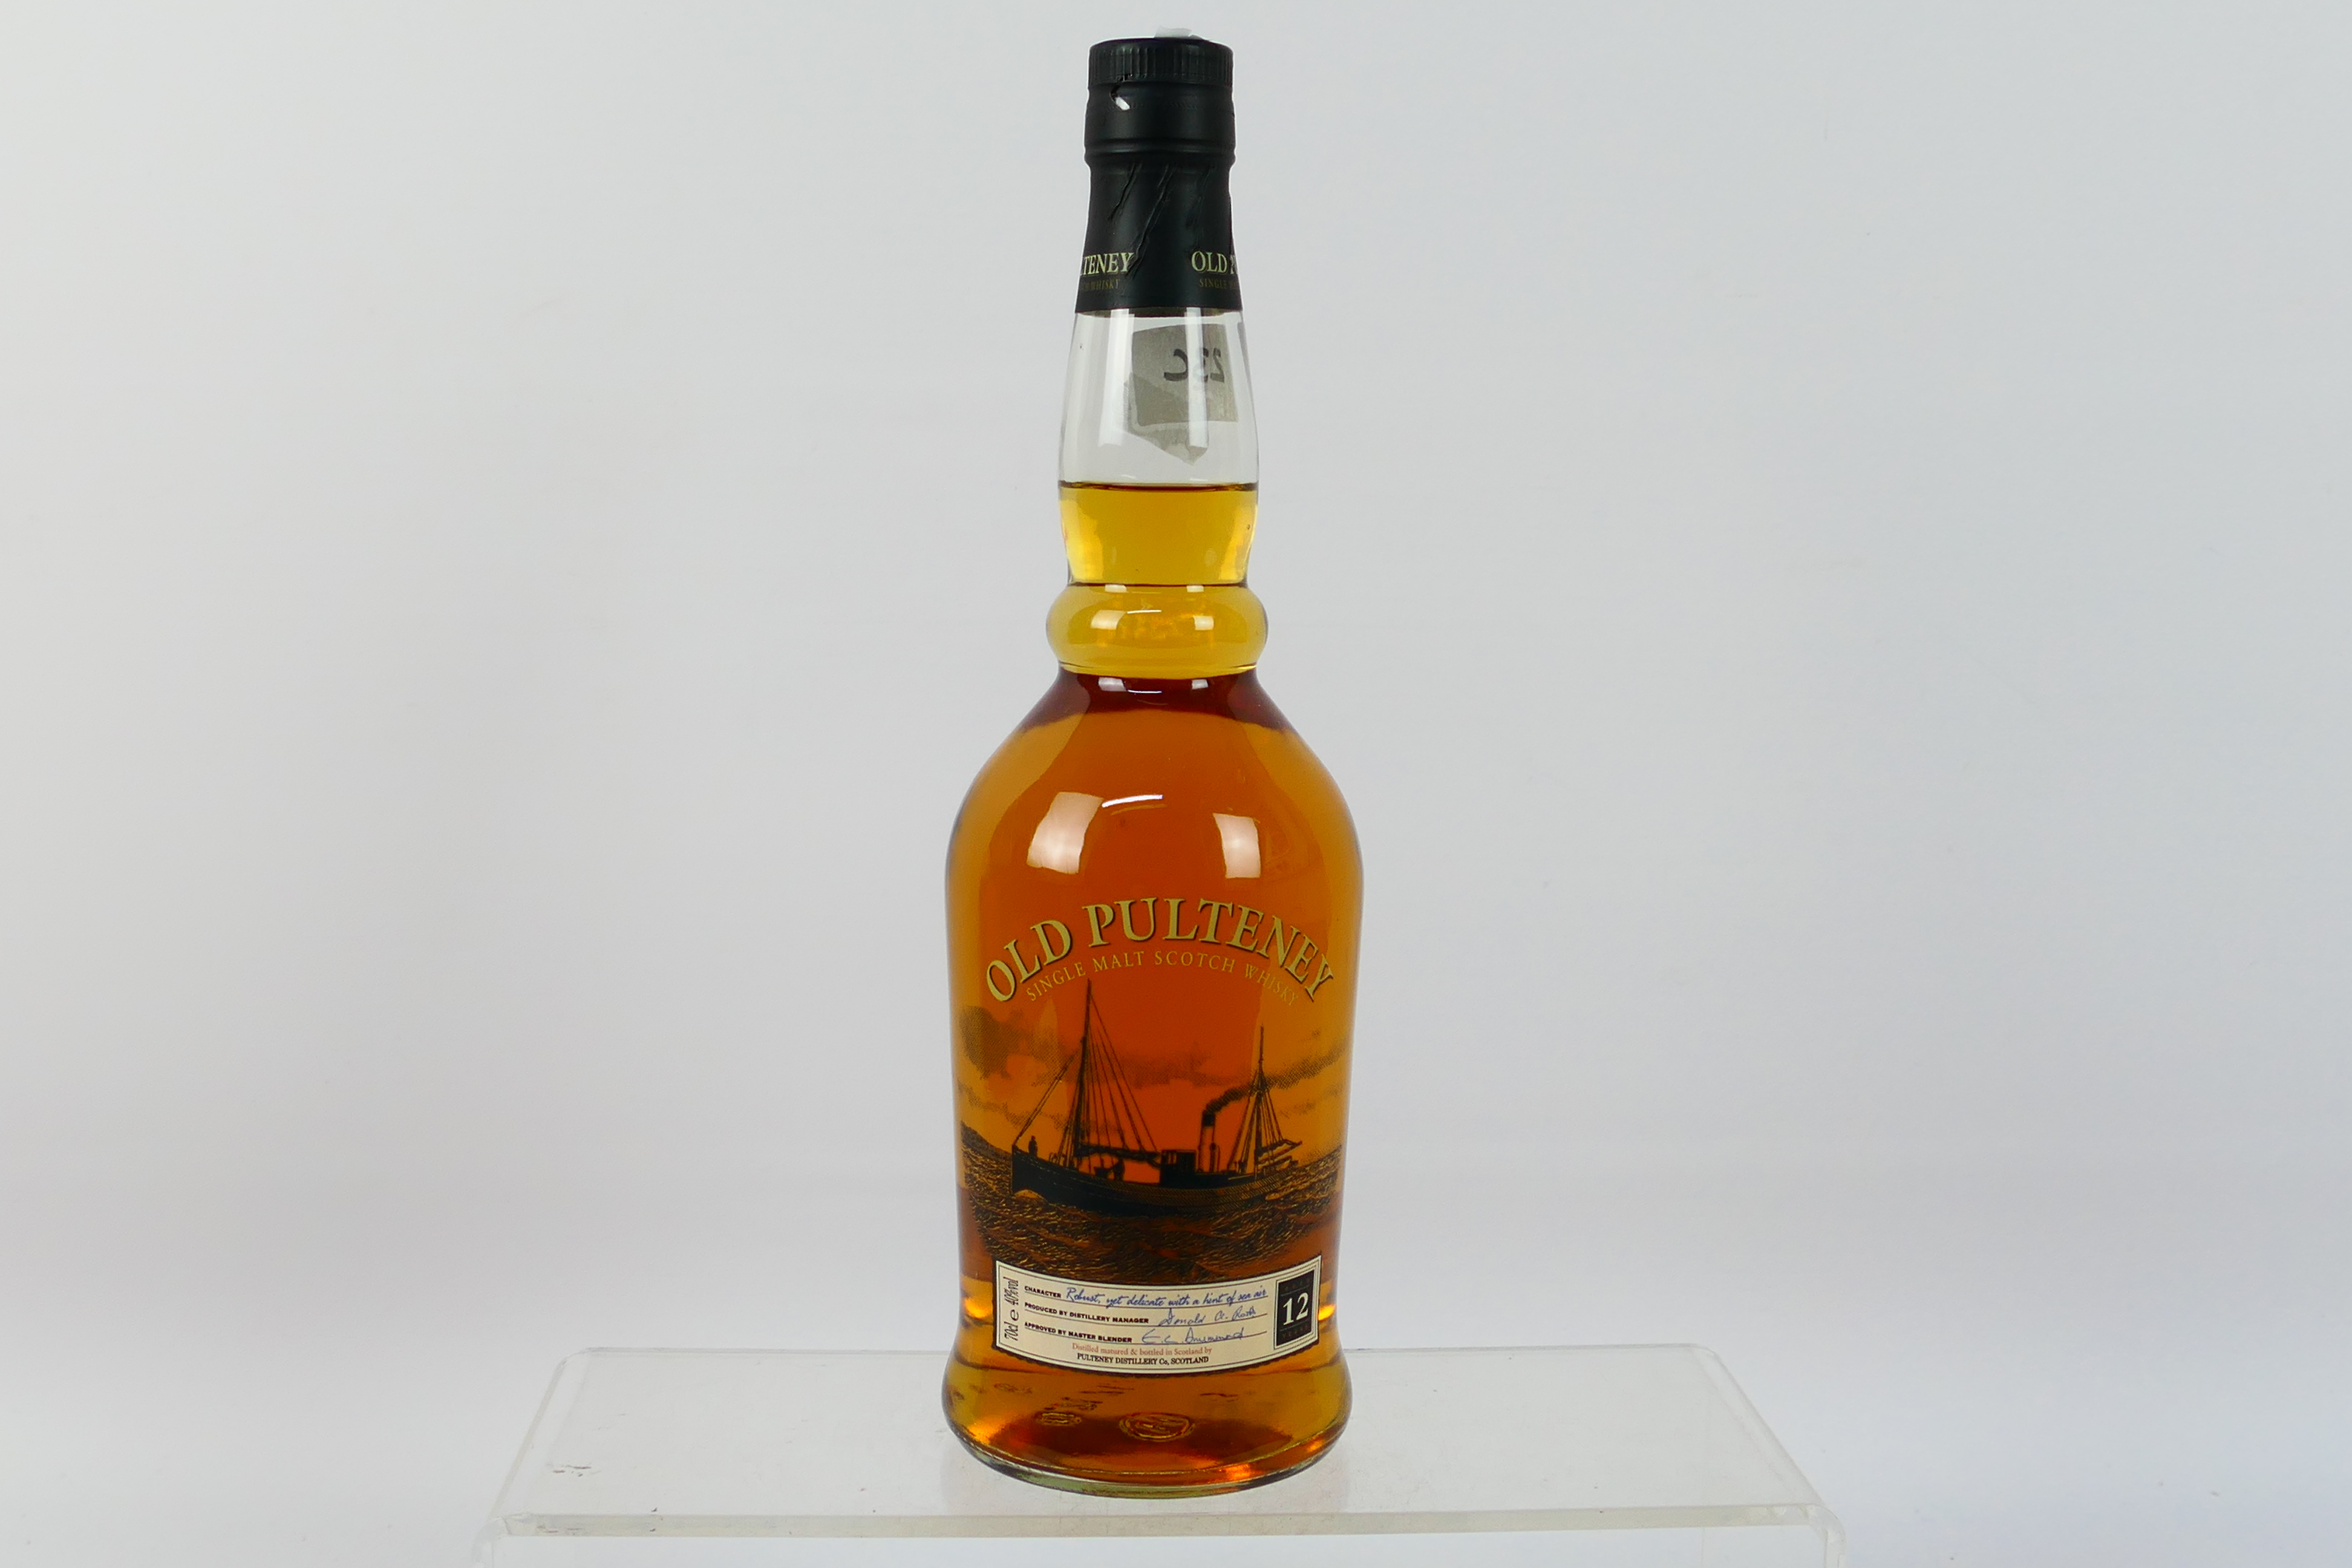 A 70cl bottle of Old Pulteney 12 Year Old single malt whisky, 40% abv.